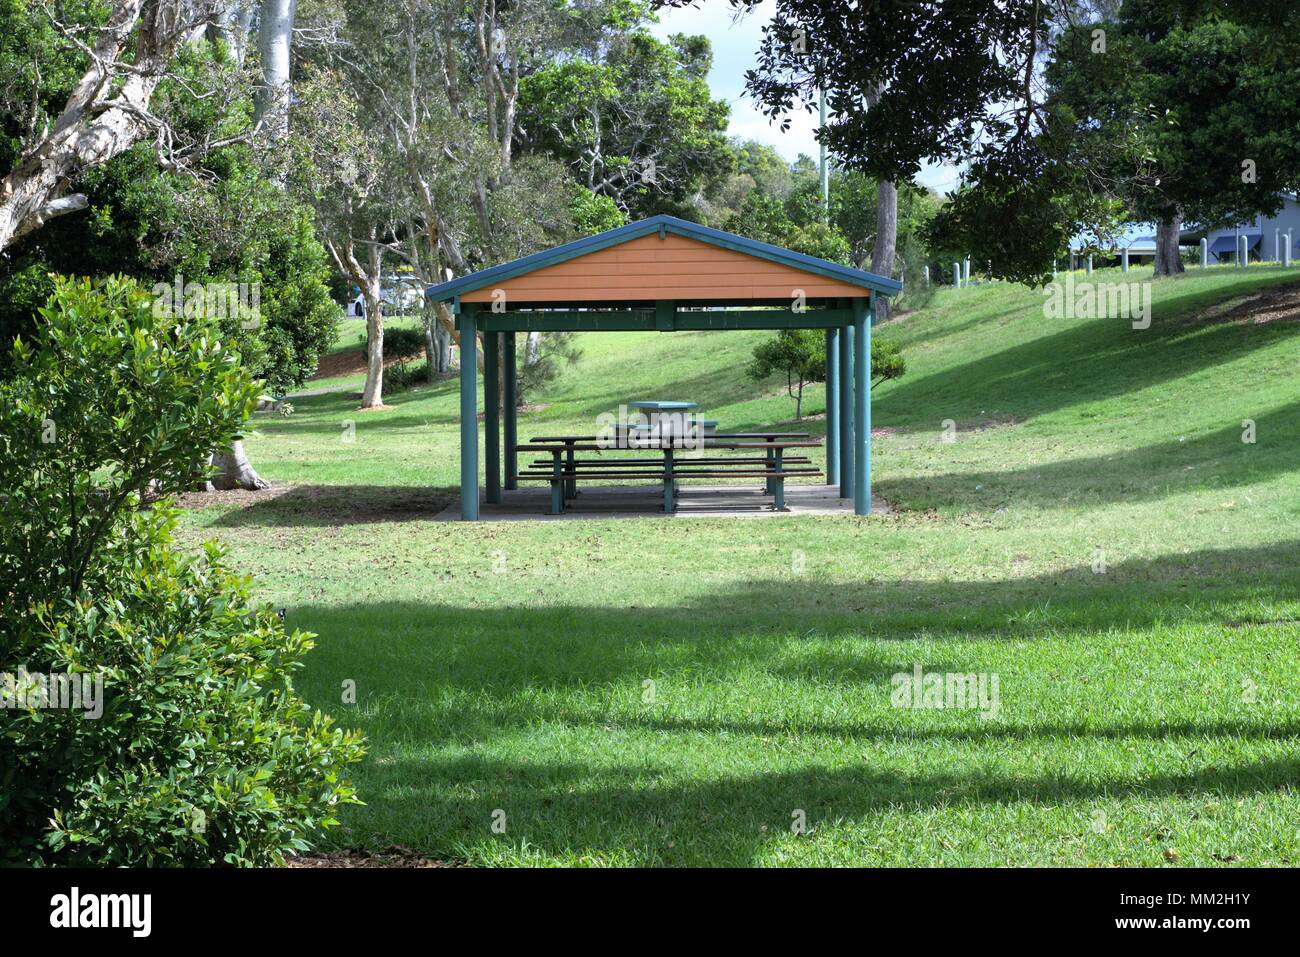 Garden shed with wooden table and bench seats in park. Gazebo in park in Australia Stock Photo